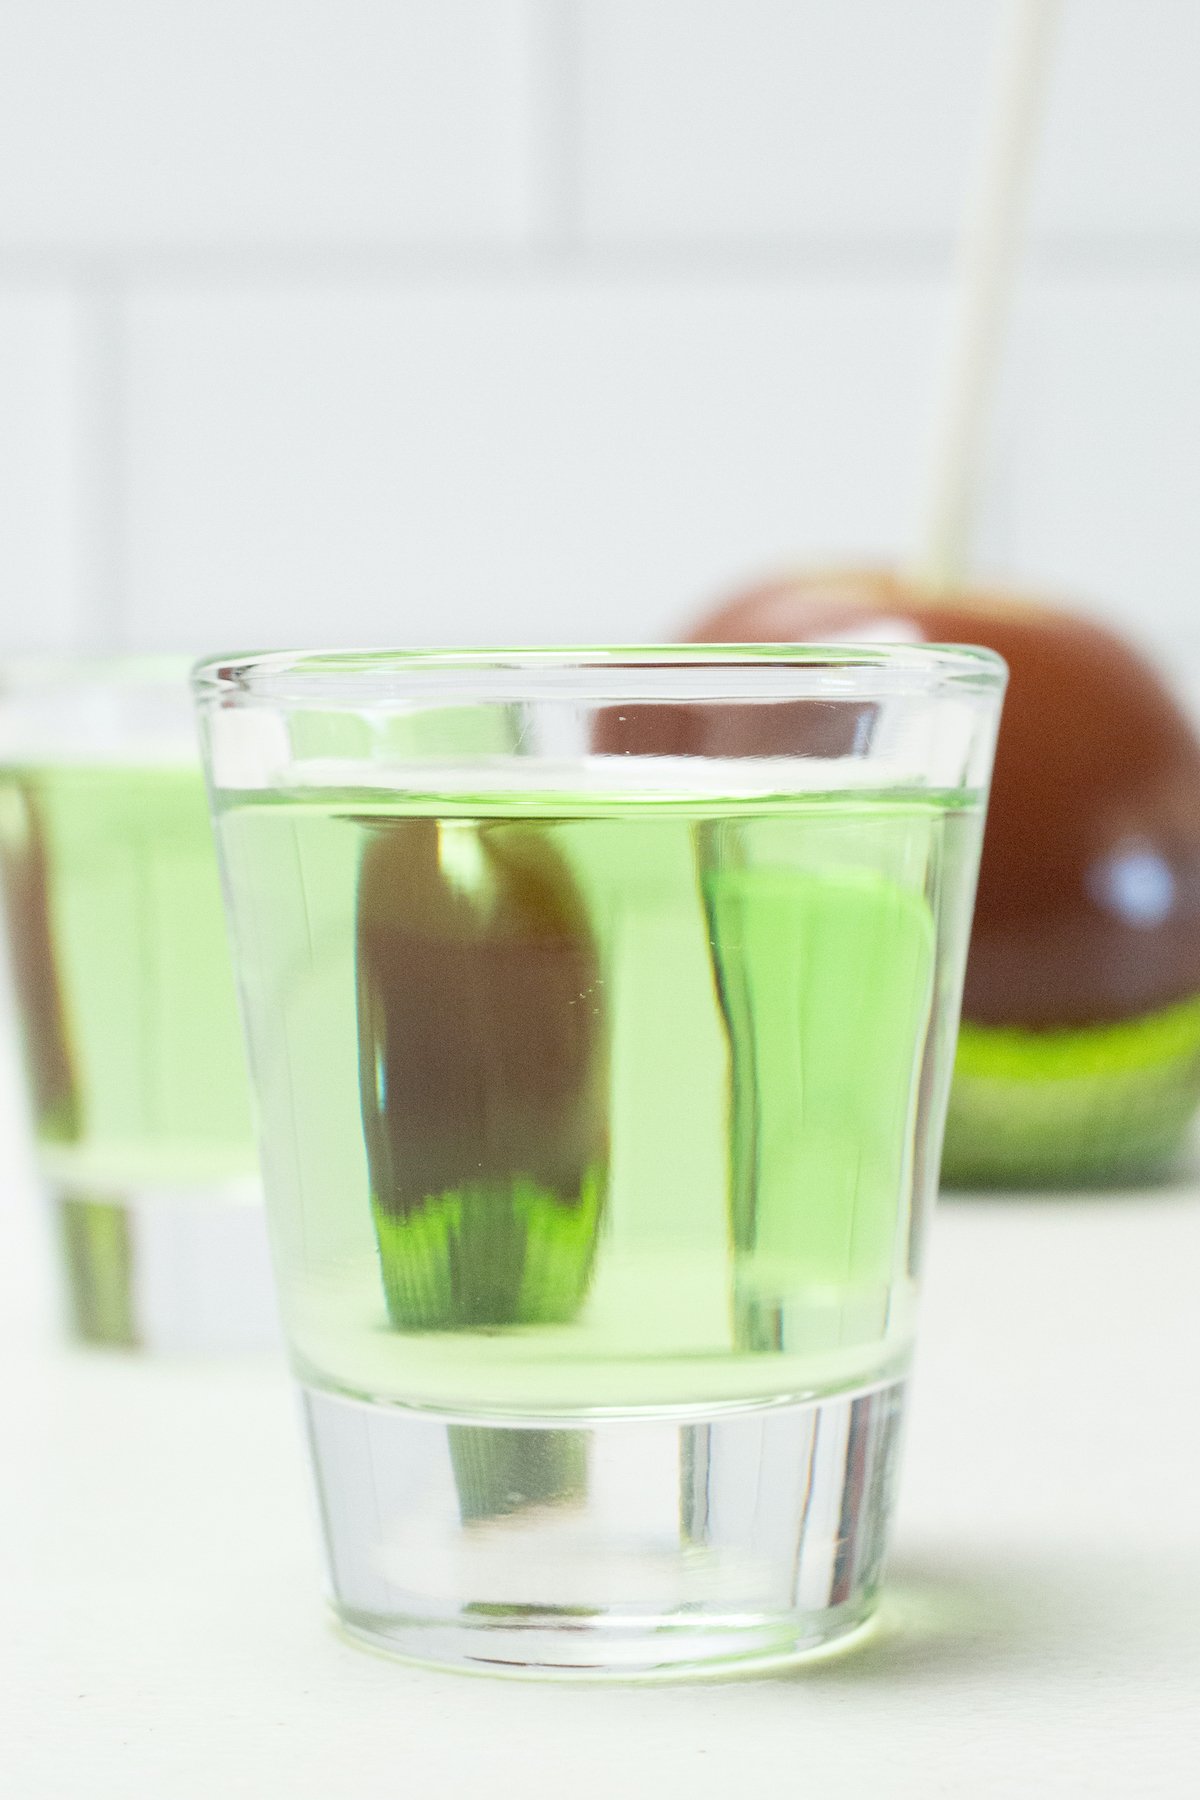 A shot glass filled with a green caramel apple shot is in focus in the foreground, a caramel apple is out of focus in the background.